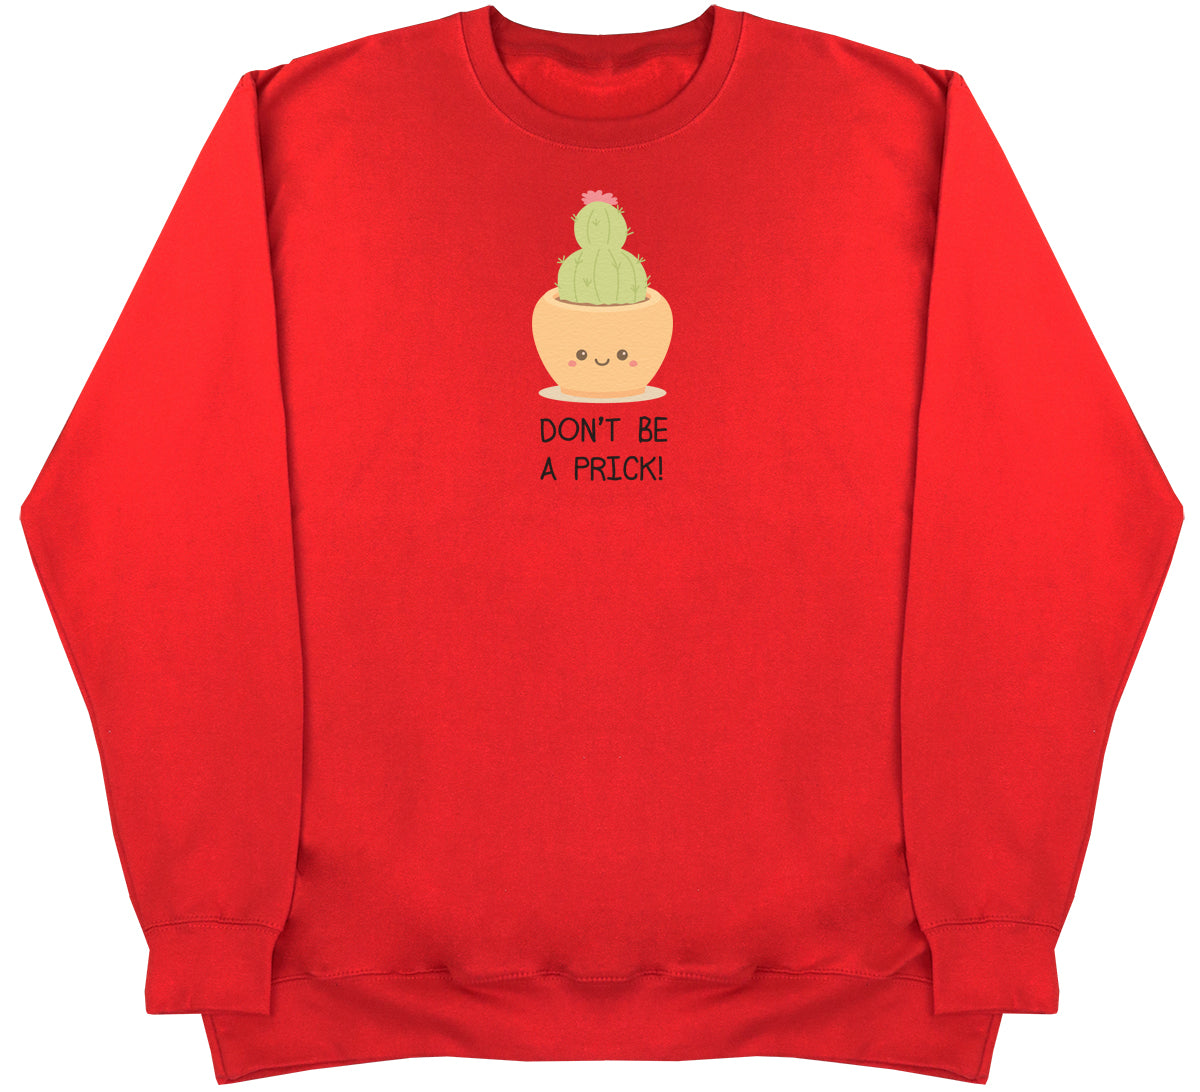 Don't Be A Prick - Huge Oversized Comfy Original Sweater